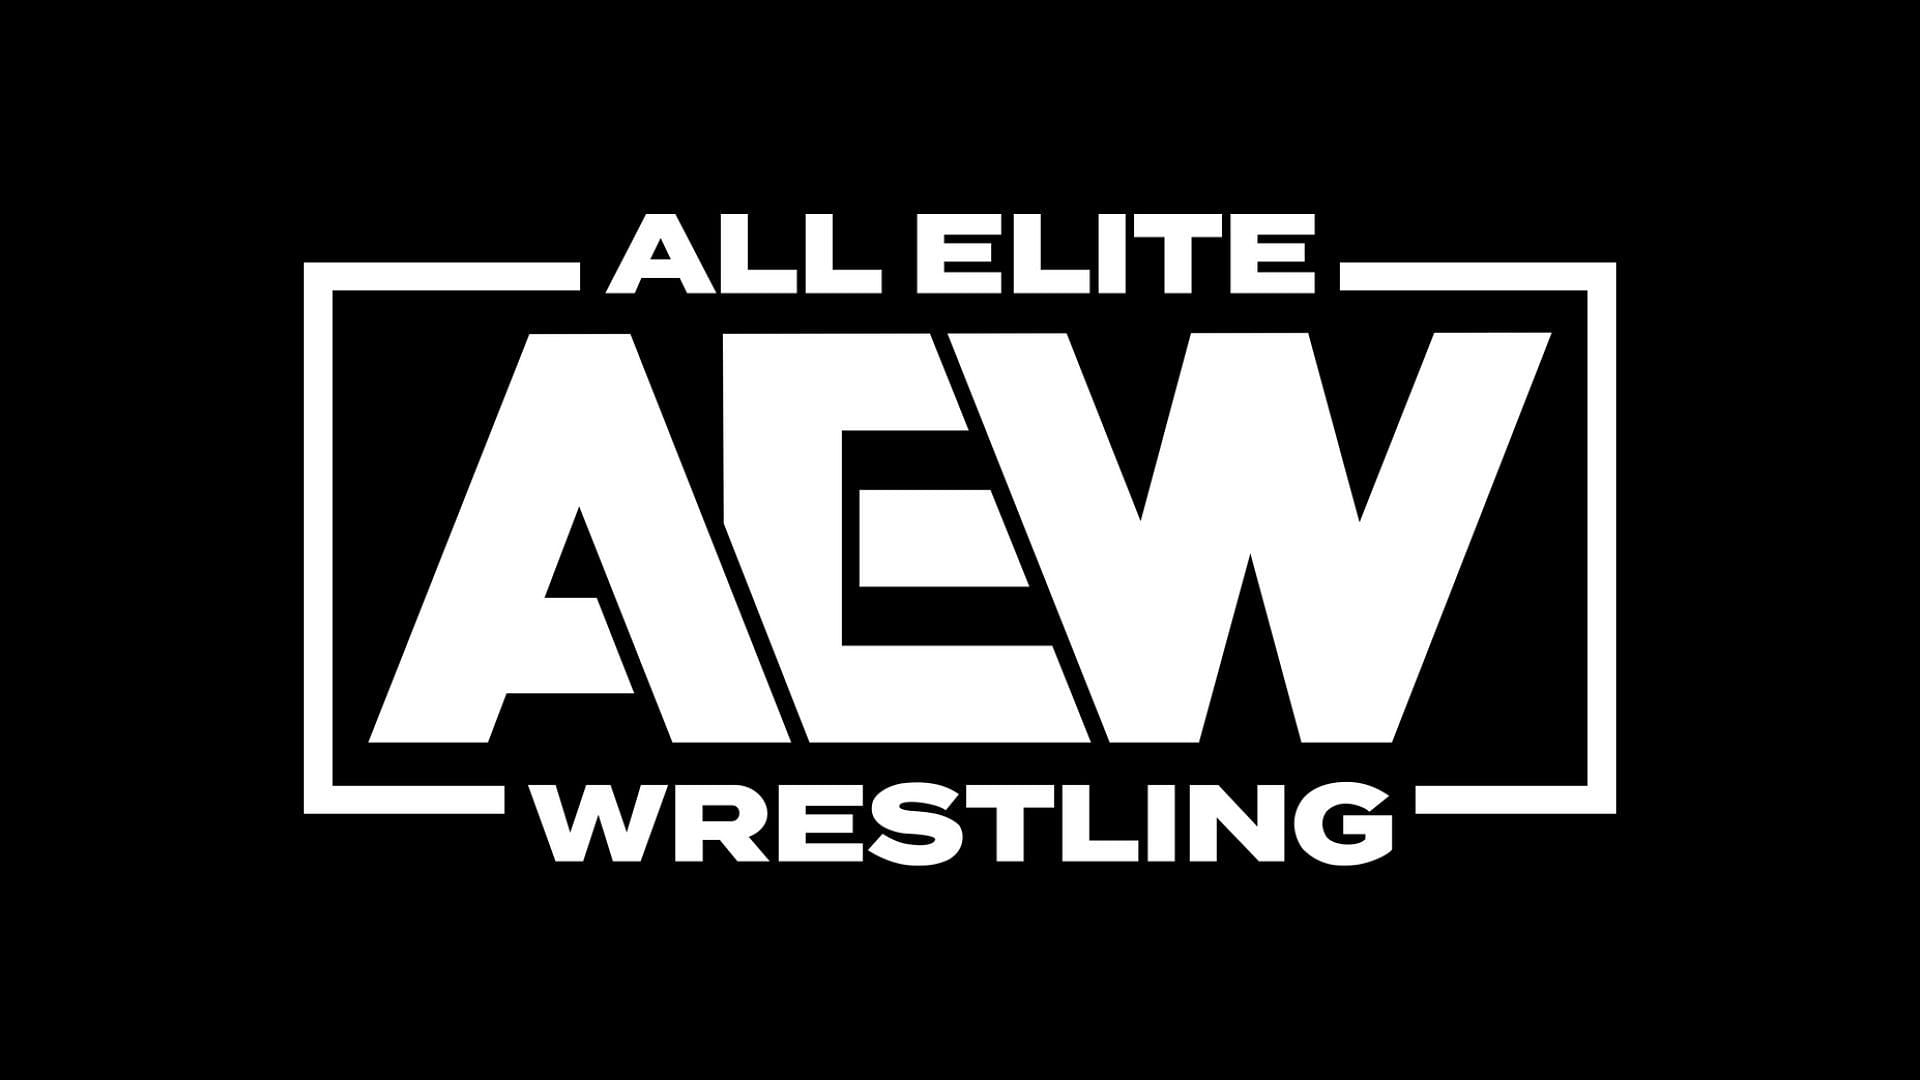 Will this veteran end up in AEW soon?